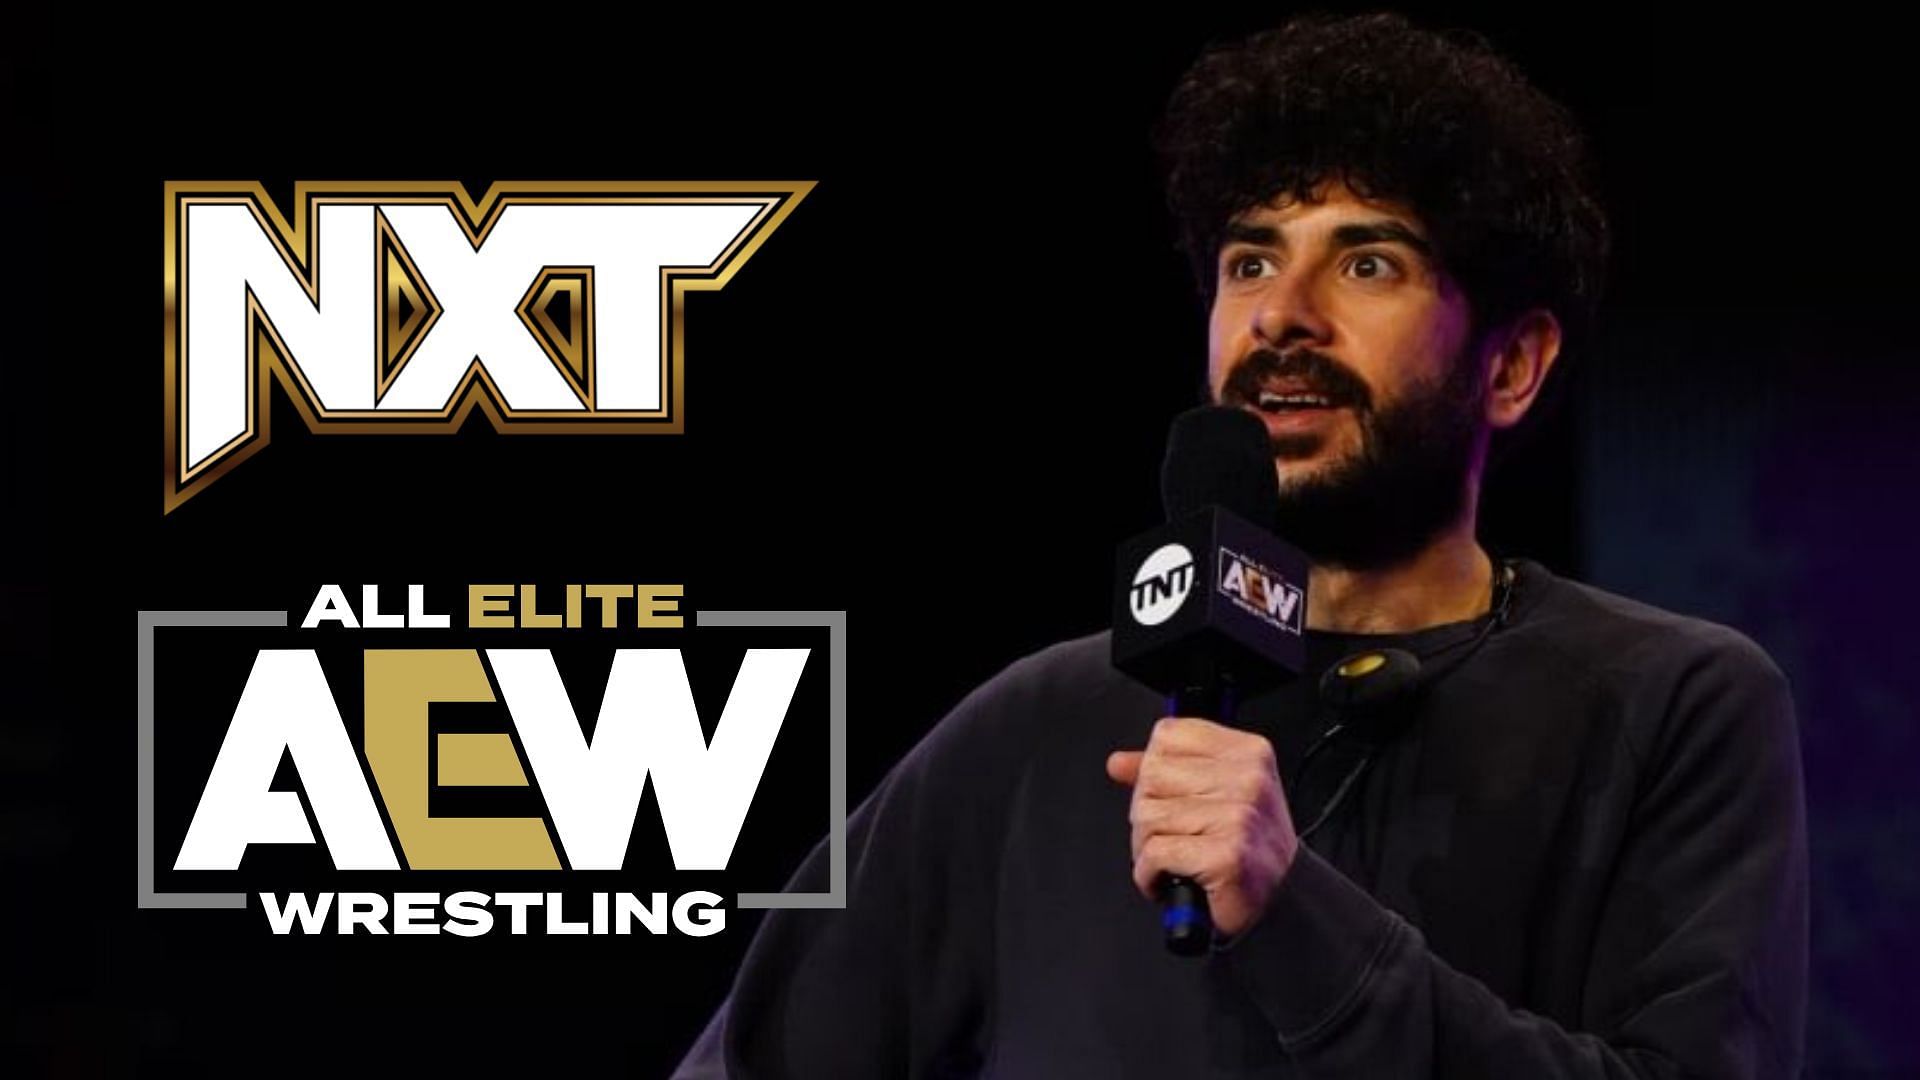 Tony Khan put a former NXT Champion against a top AEW star this past week on Dynamite